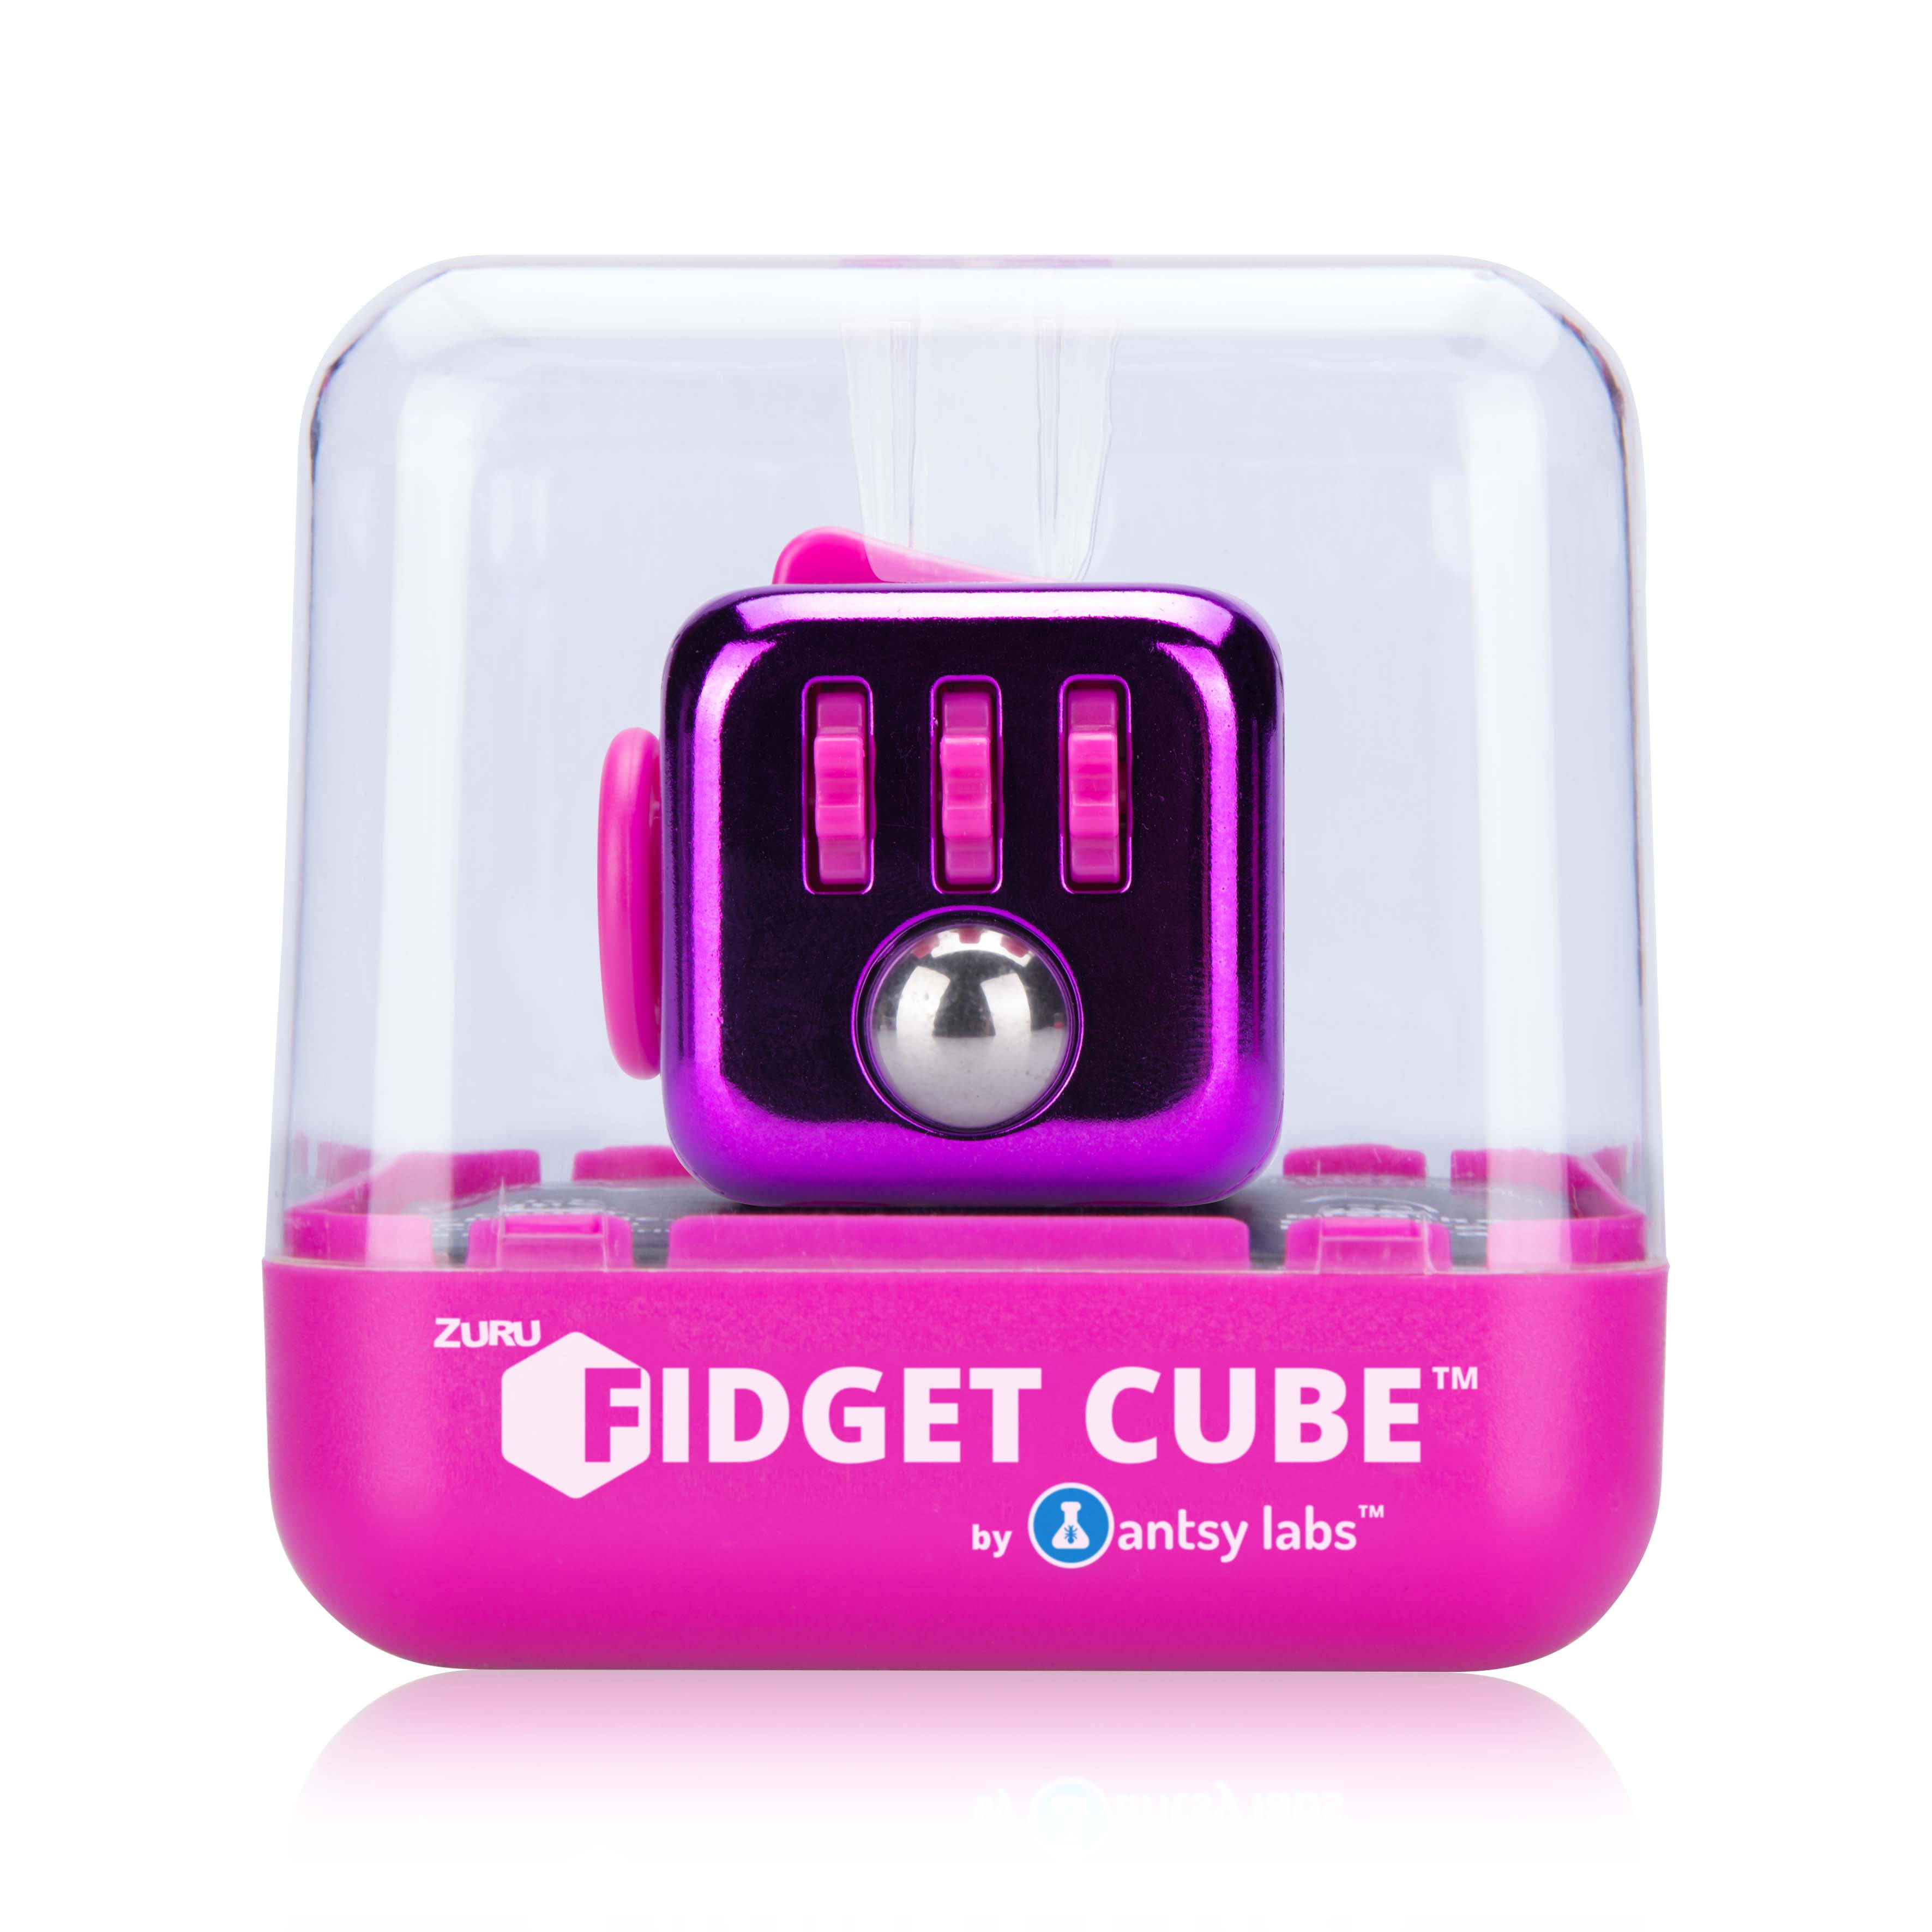 The Original Fidget Cube by Antsy Labs 